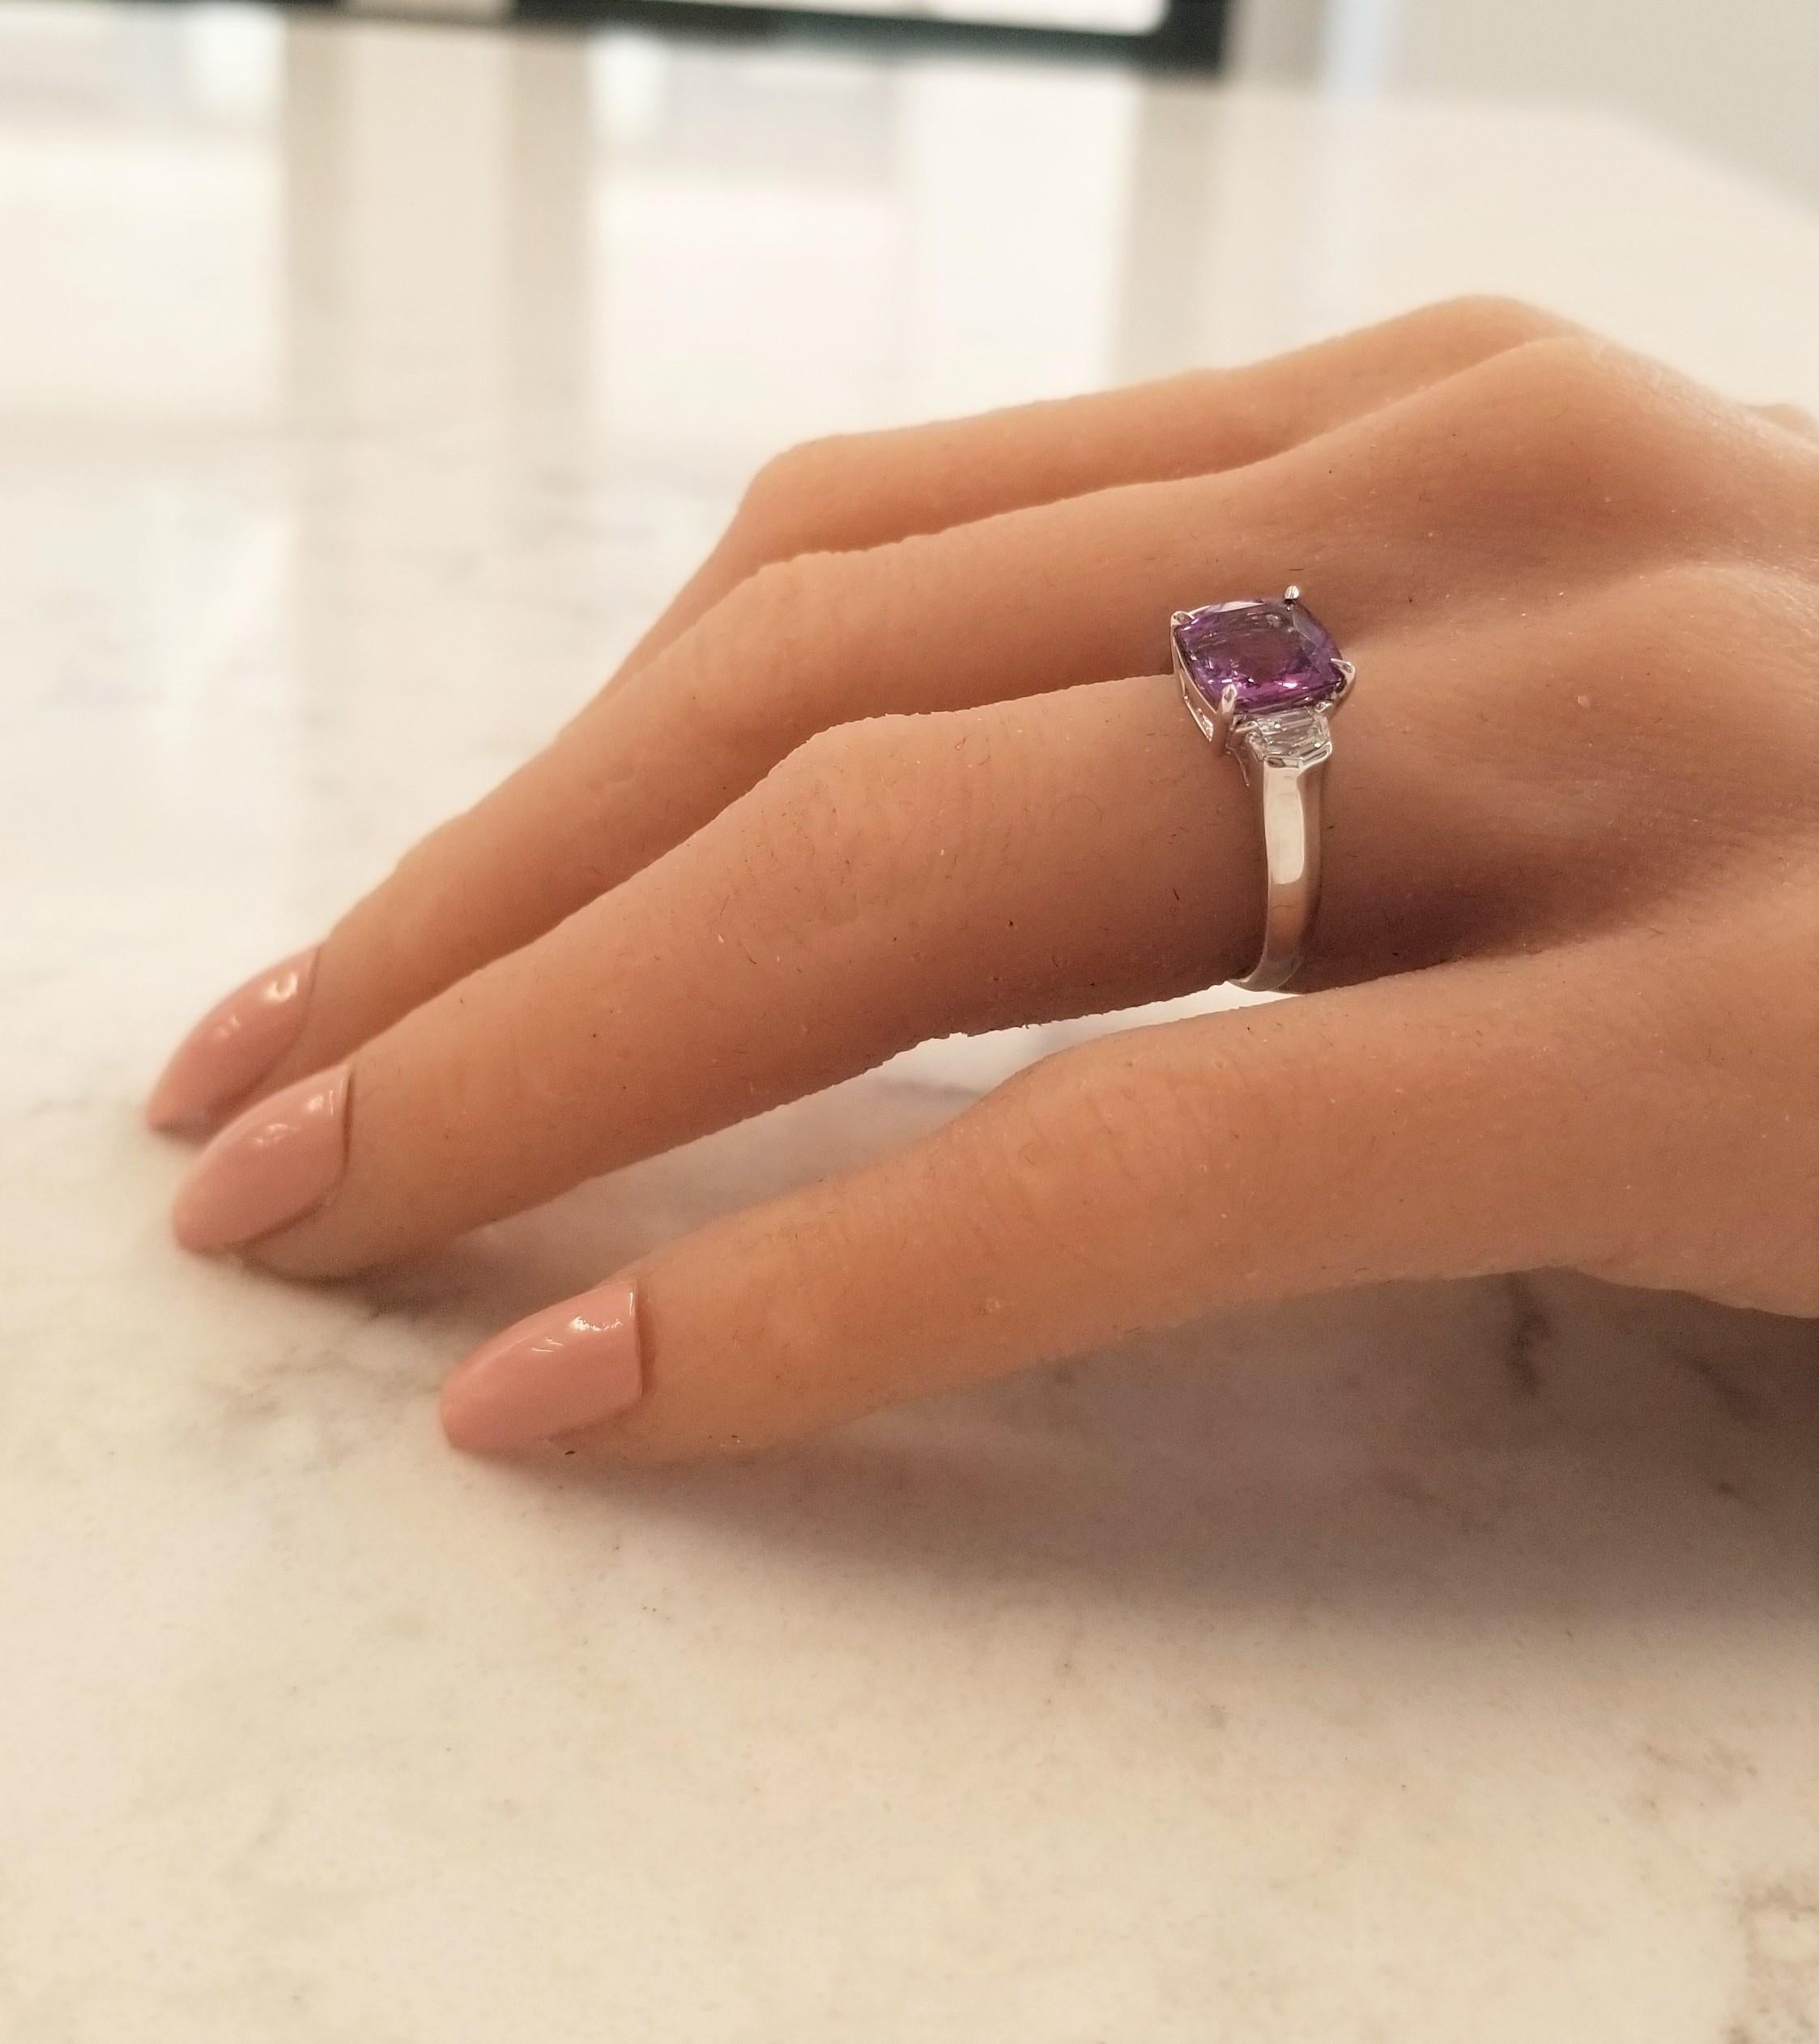 This is a 3.04 carat square cushion natural pink sapphire. The gem source is Sri Lanka. Its color is vivid purplish pink. Its transparency and luster are excellent. Two cadillac-cut white diamonds hug this dynamic sapphire totaling 0.48 carats, all